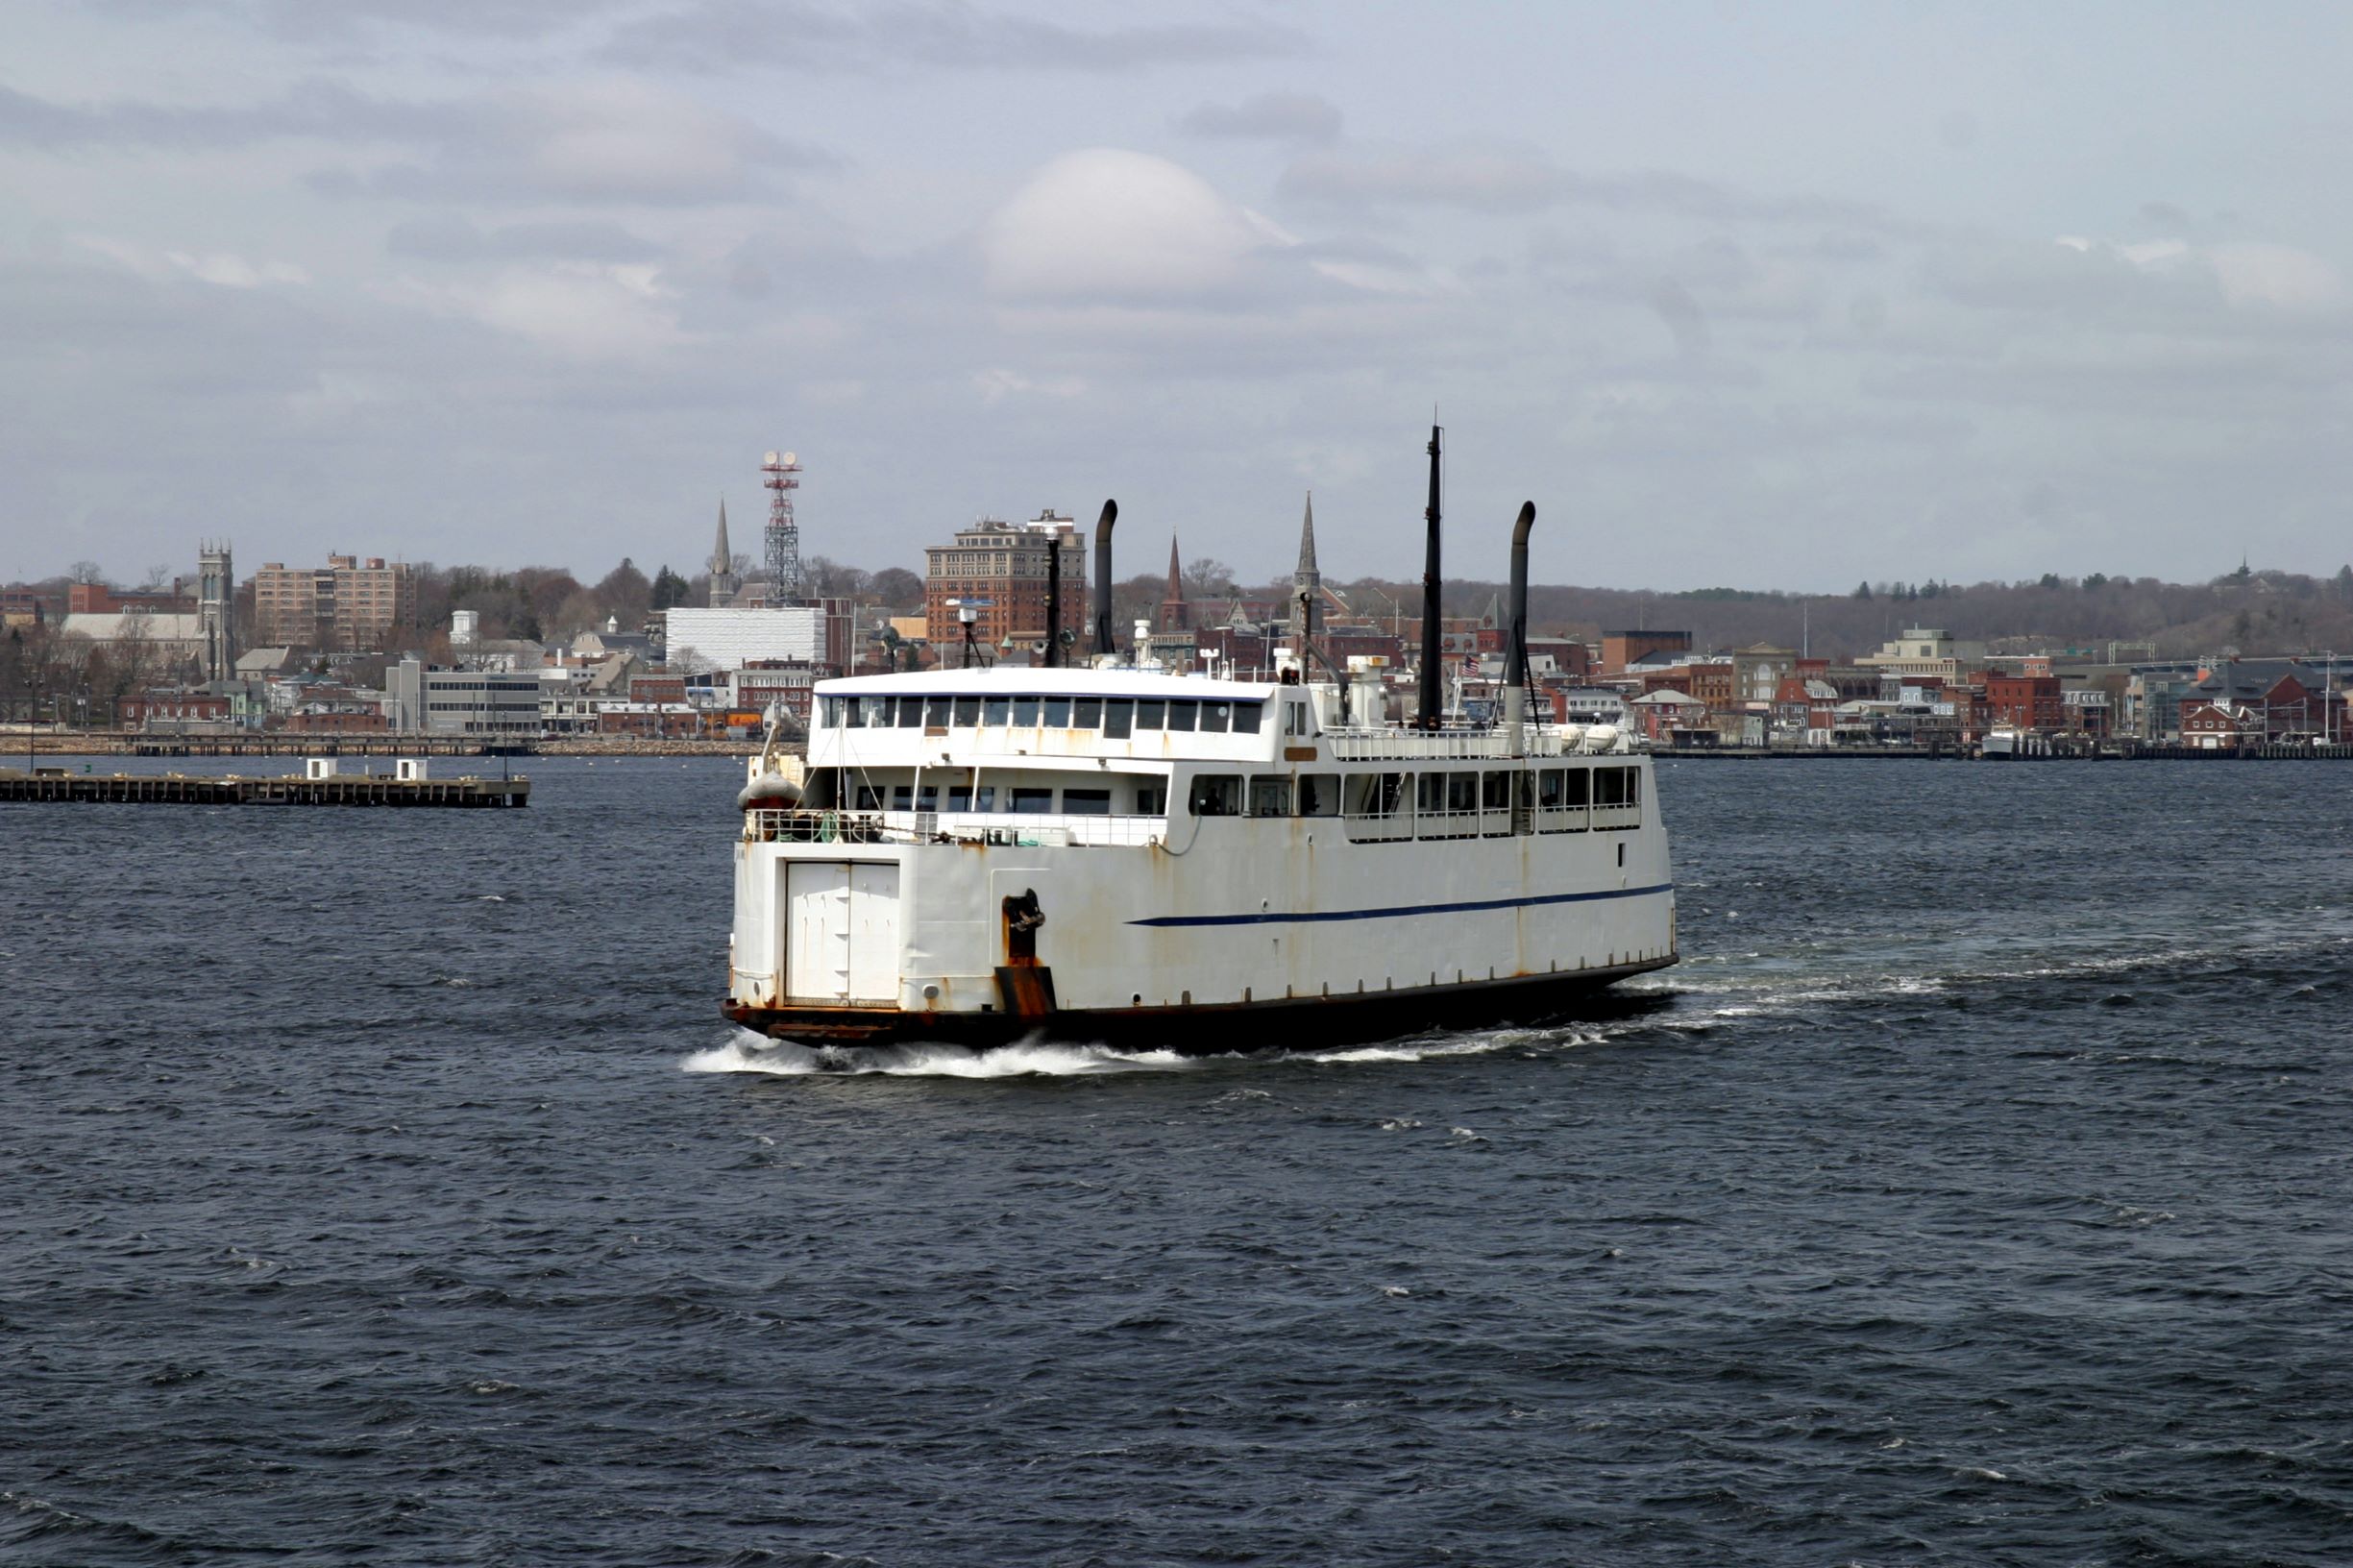 A ferry is traveling an urban waterway.